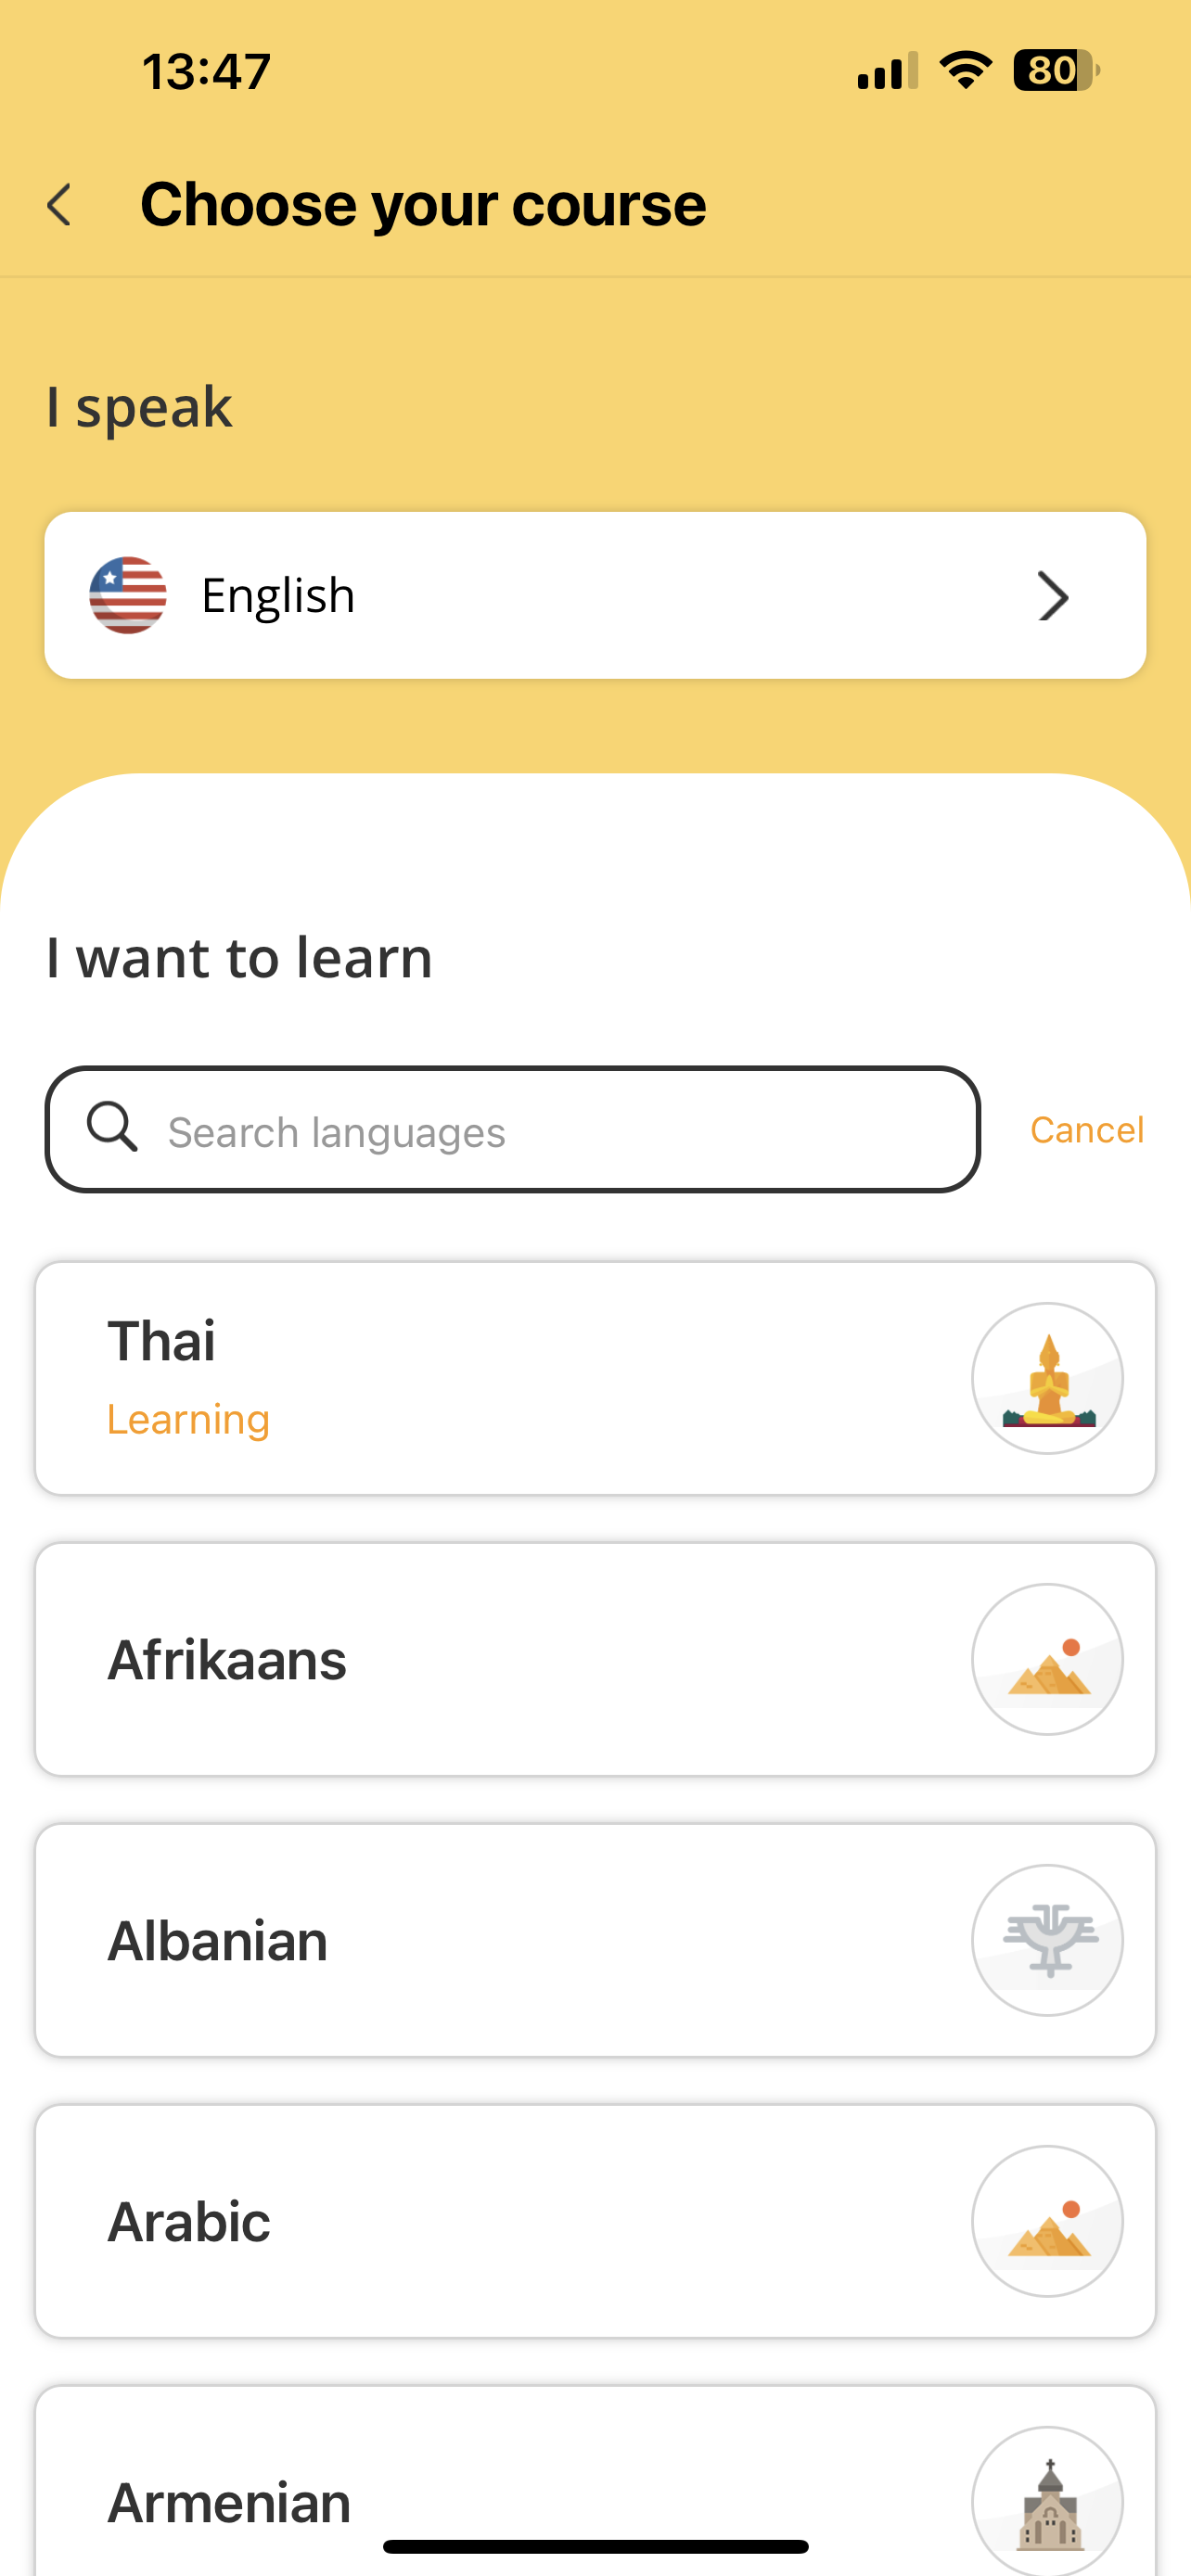 Boost cognitive skills and cultural understanding through language learning with Ling App. Explore 60+ languages, each with 200 lessons. Free version available. 